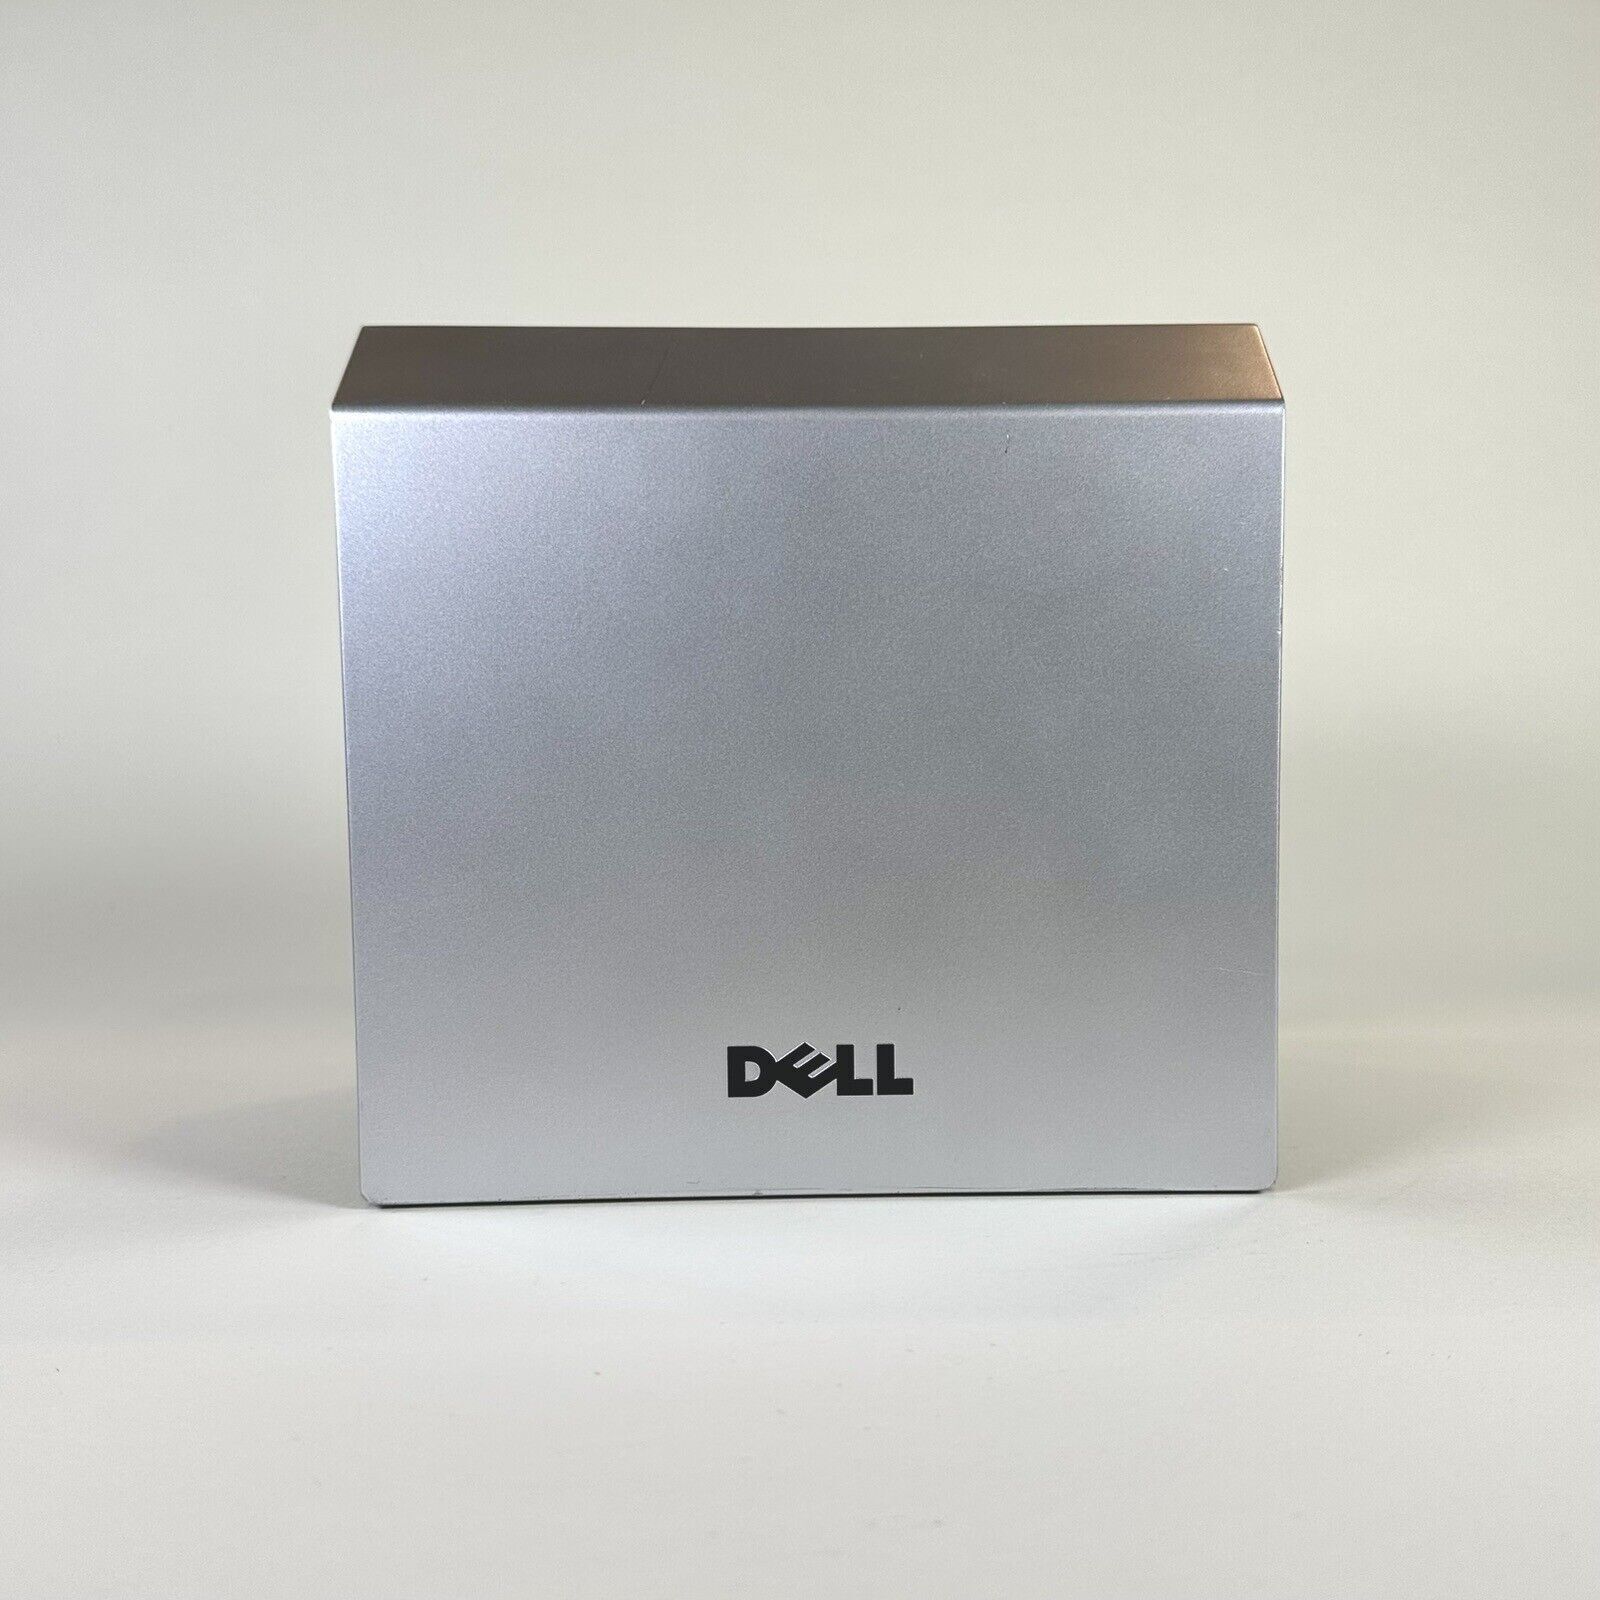 Dell Zylux Multimedia Computer Speaker System Powered Subwoofer Model A525